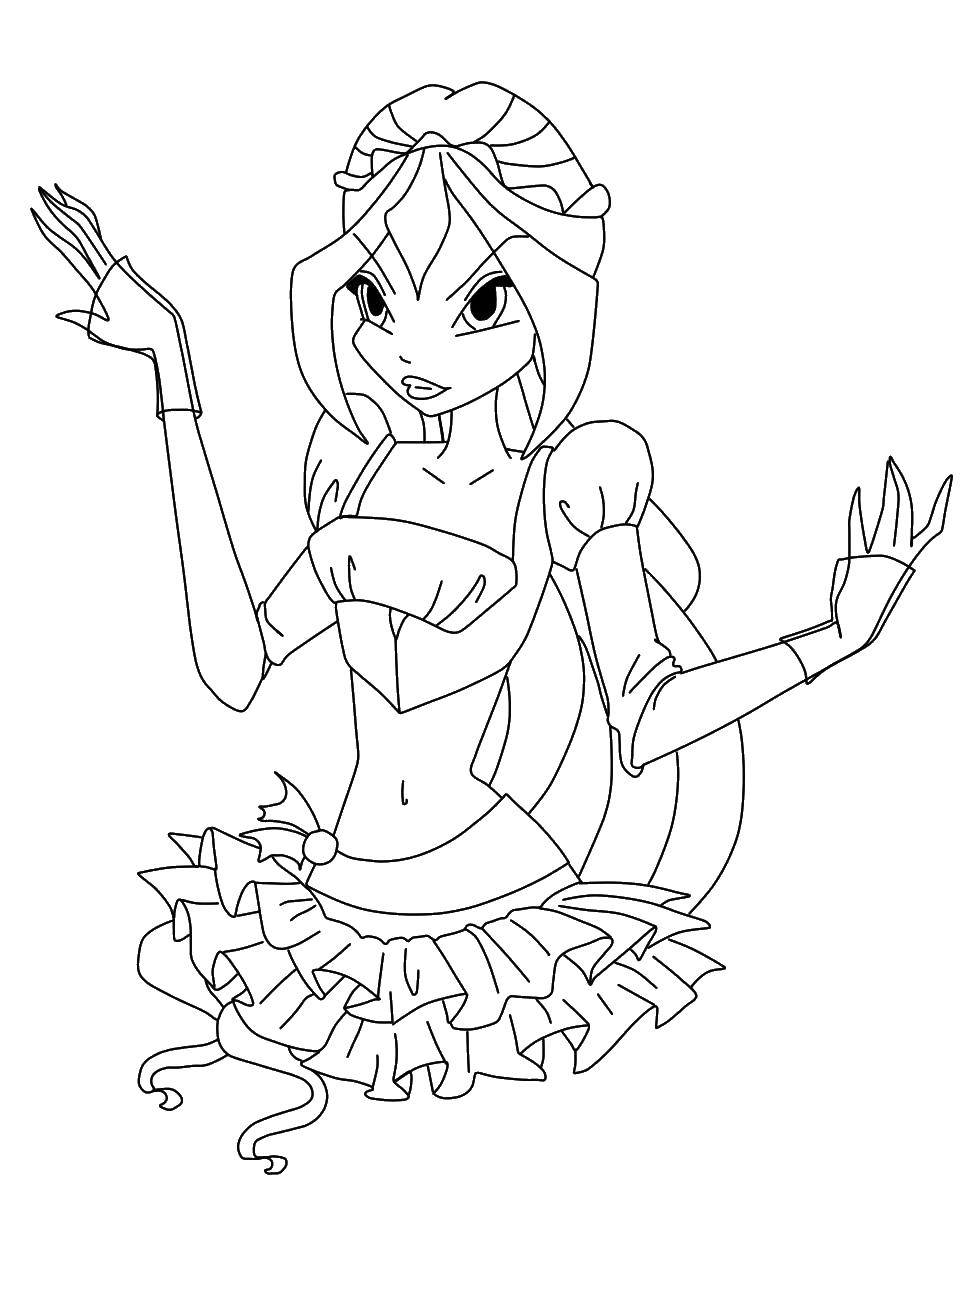 Coloring Bloom. Category Winx club. Tags:  the fairy, bloom, wings.